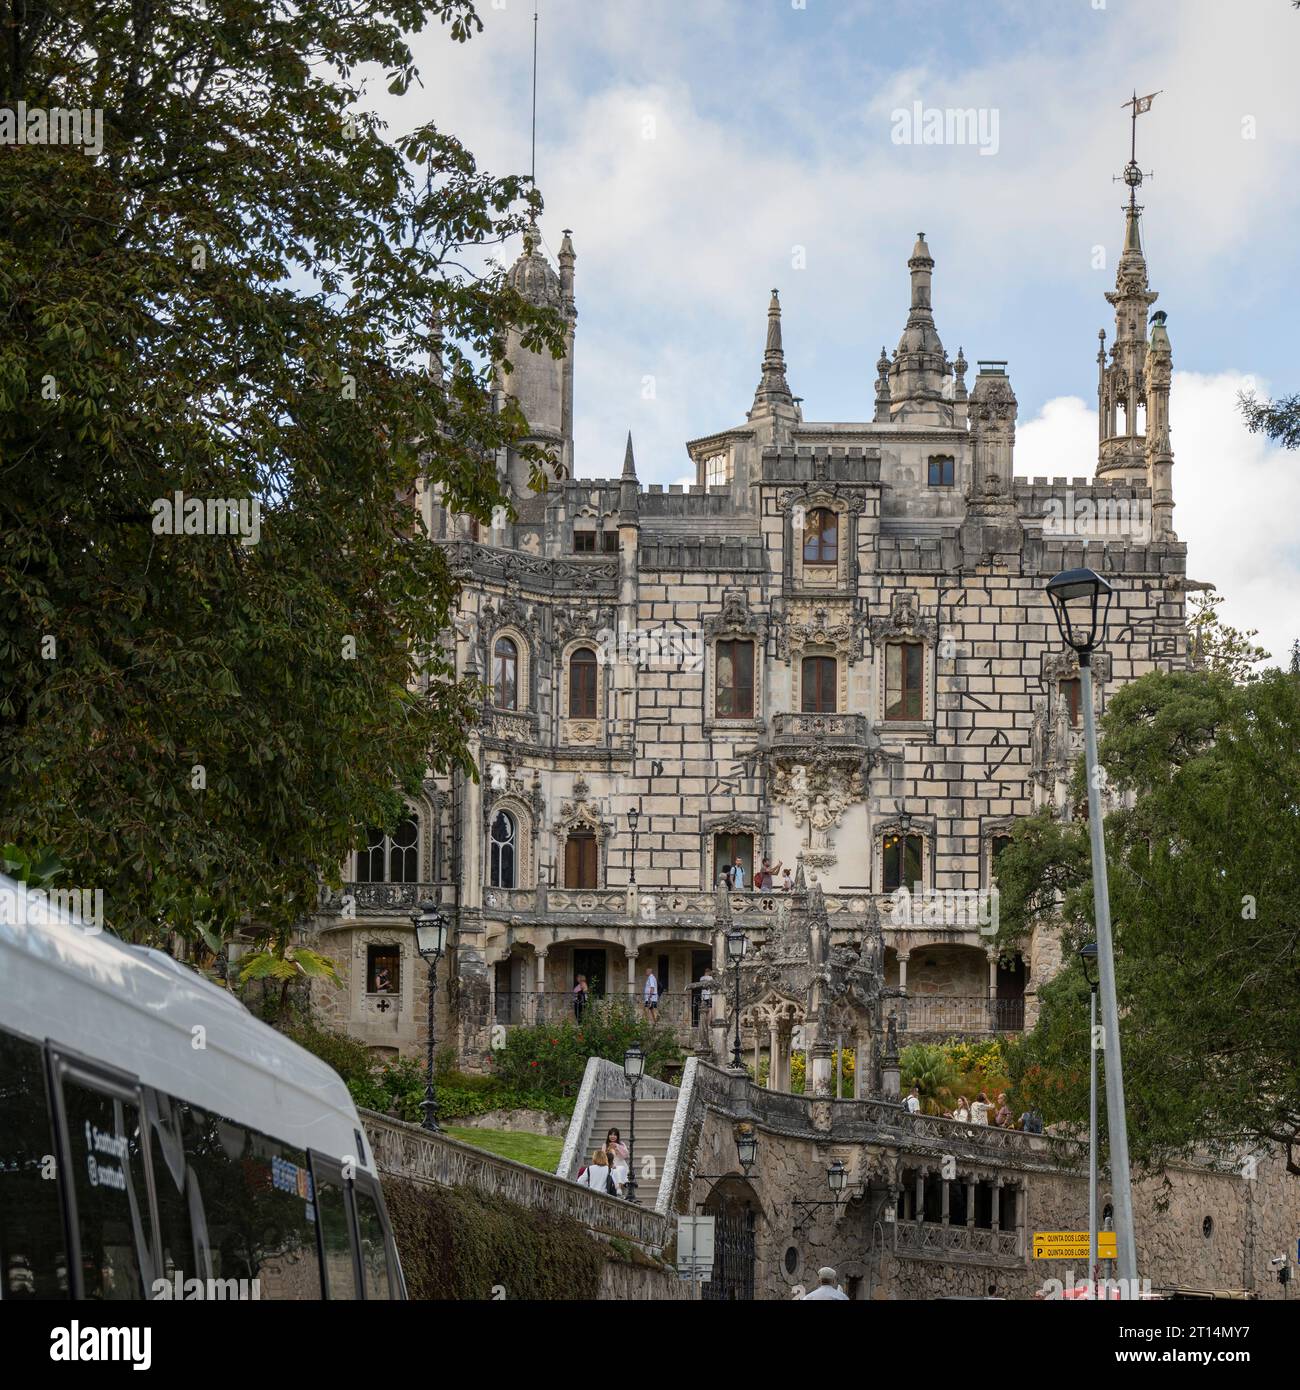 Quinta da Regaleira Palace, Sintra, Portugal Sintra is a town and municipality in the Greater Lisbon region of Portugal, A major tourist destination f Stock Photo